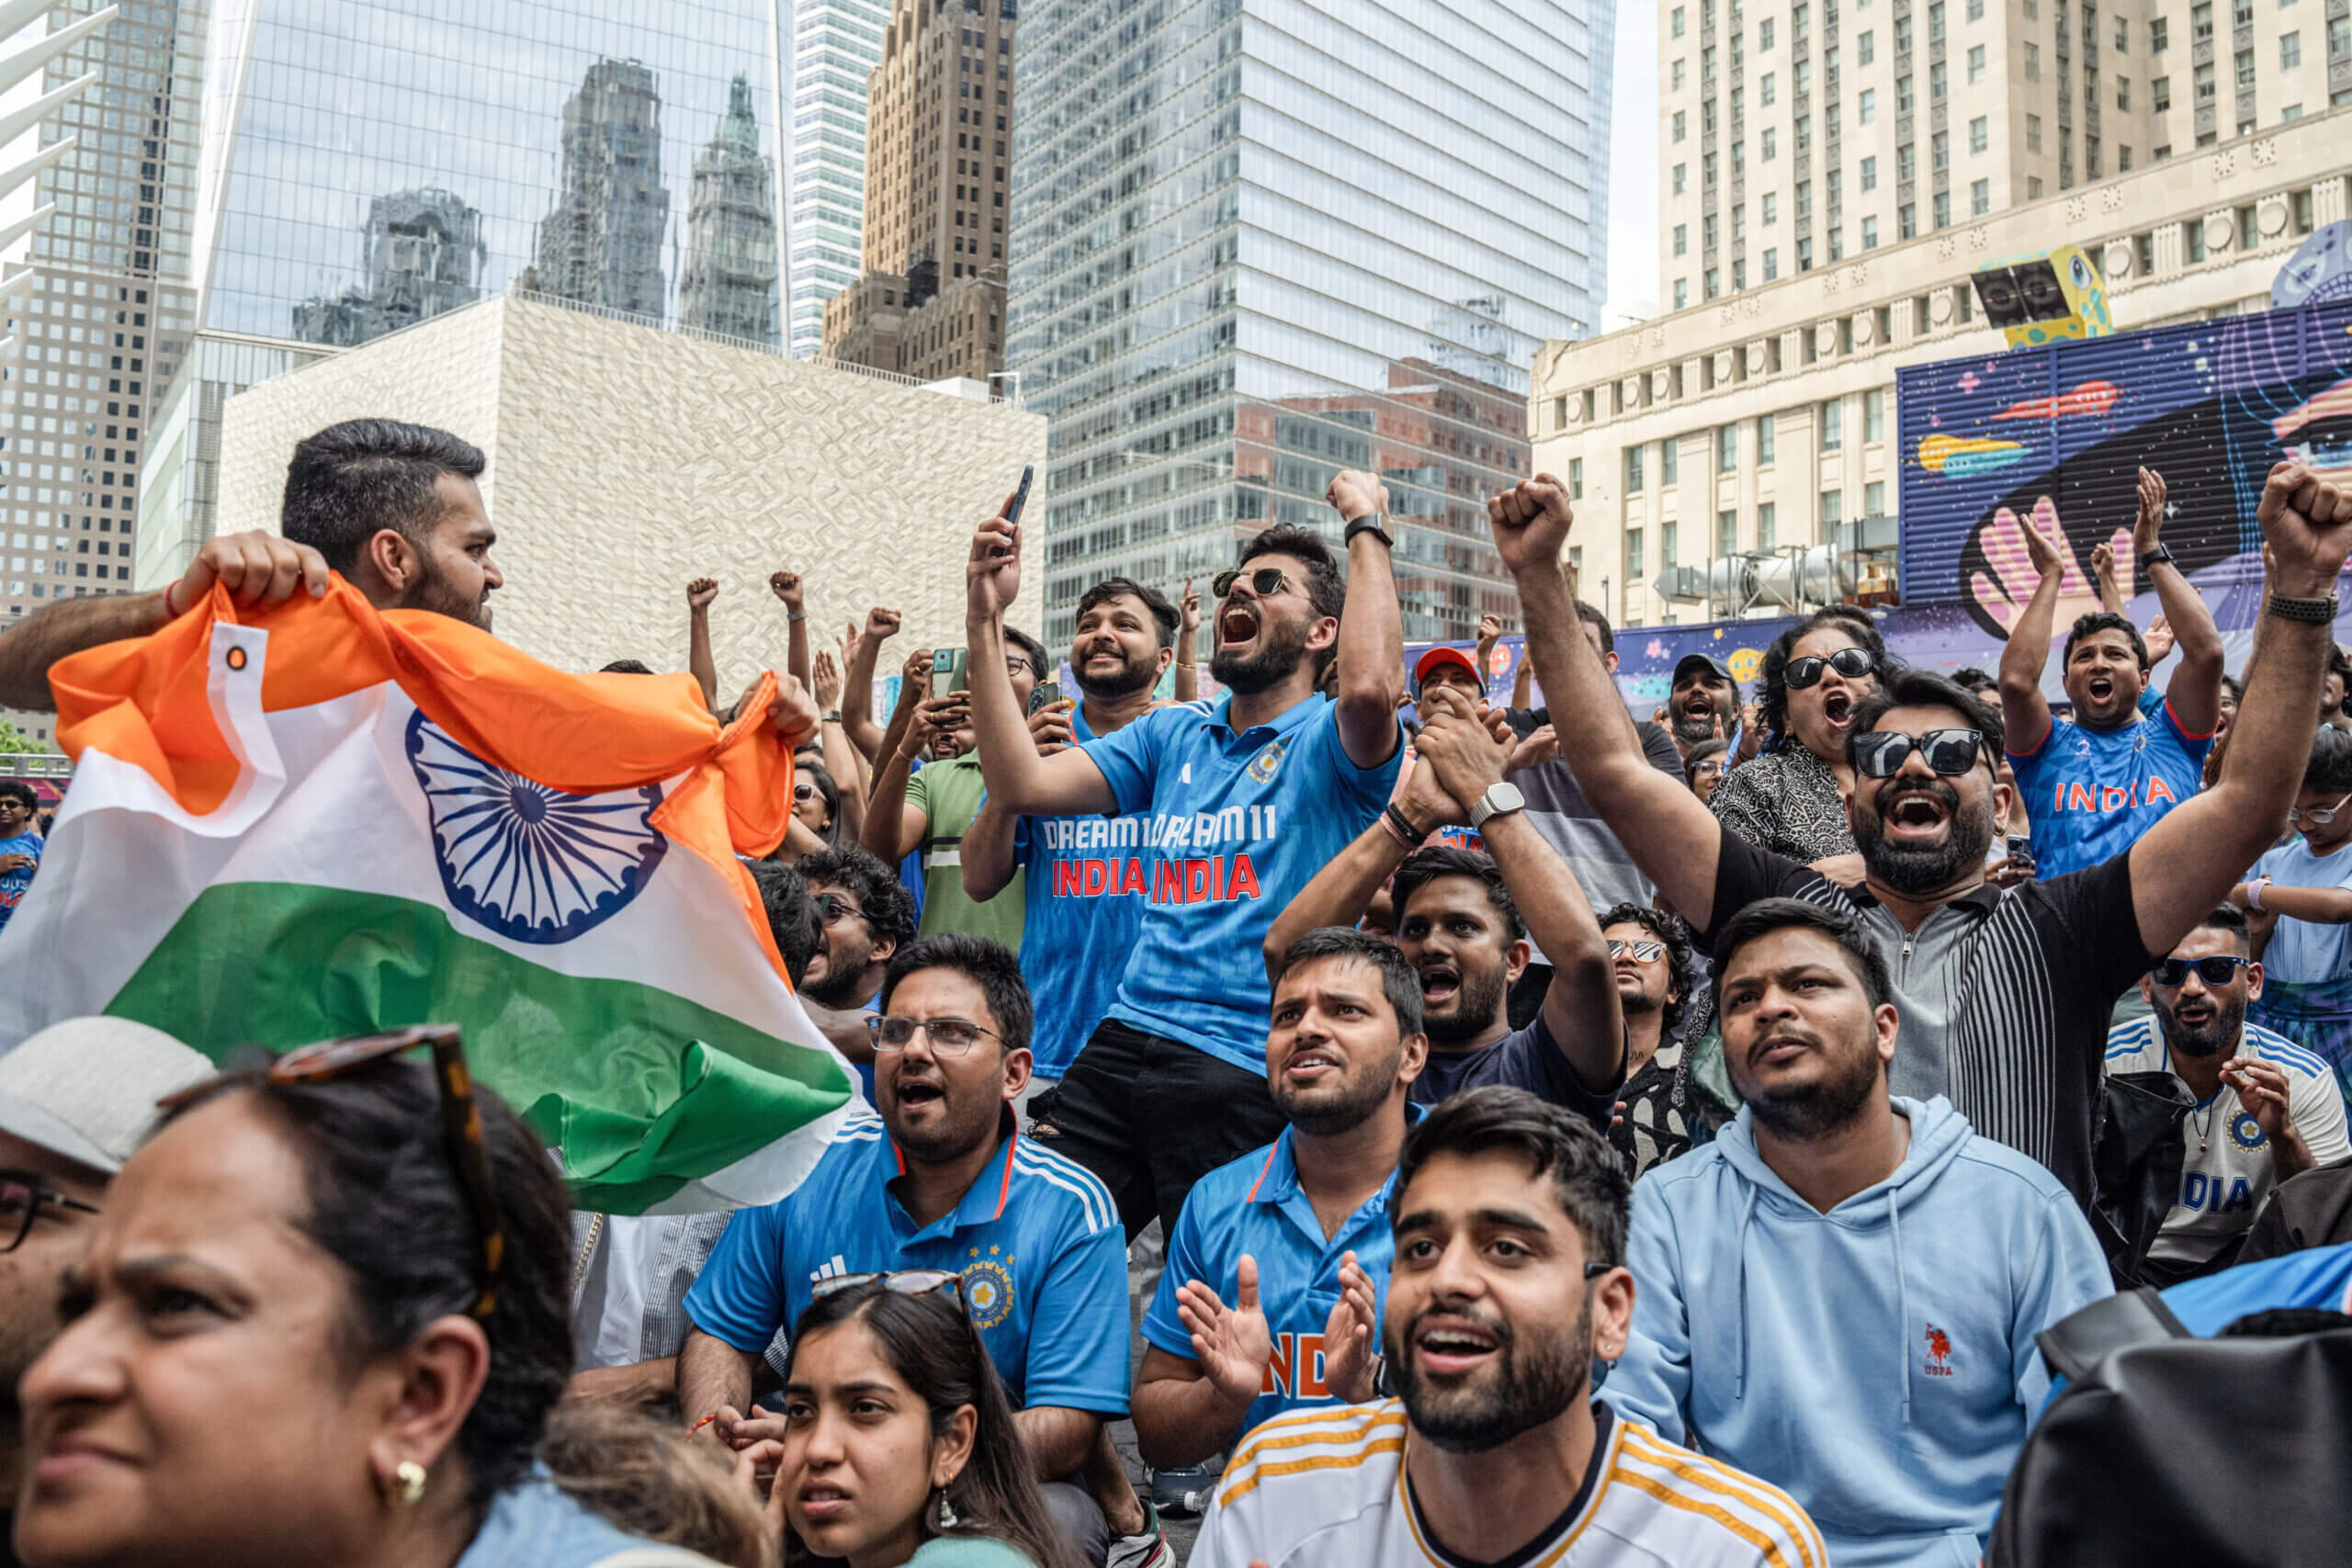 How cricket became sport’s next big thing – Olympics, India, the U.S. and other new markets